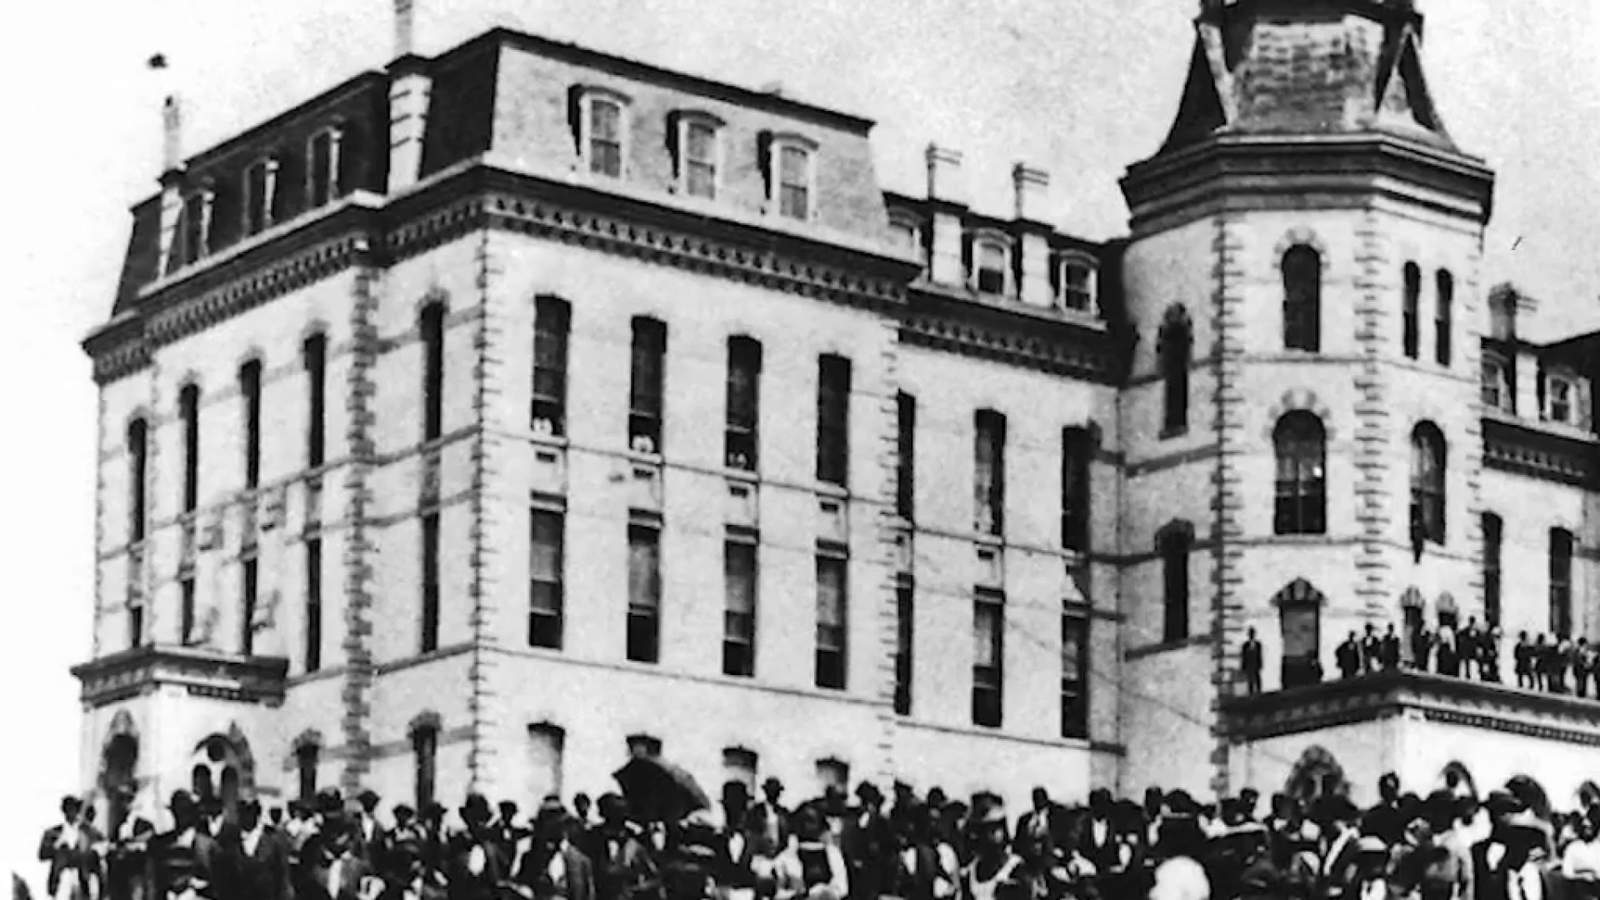 The history behind Black colleges and universities known as HBCU’s